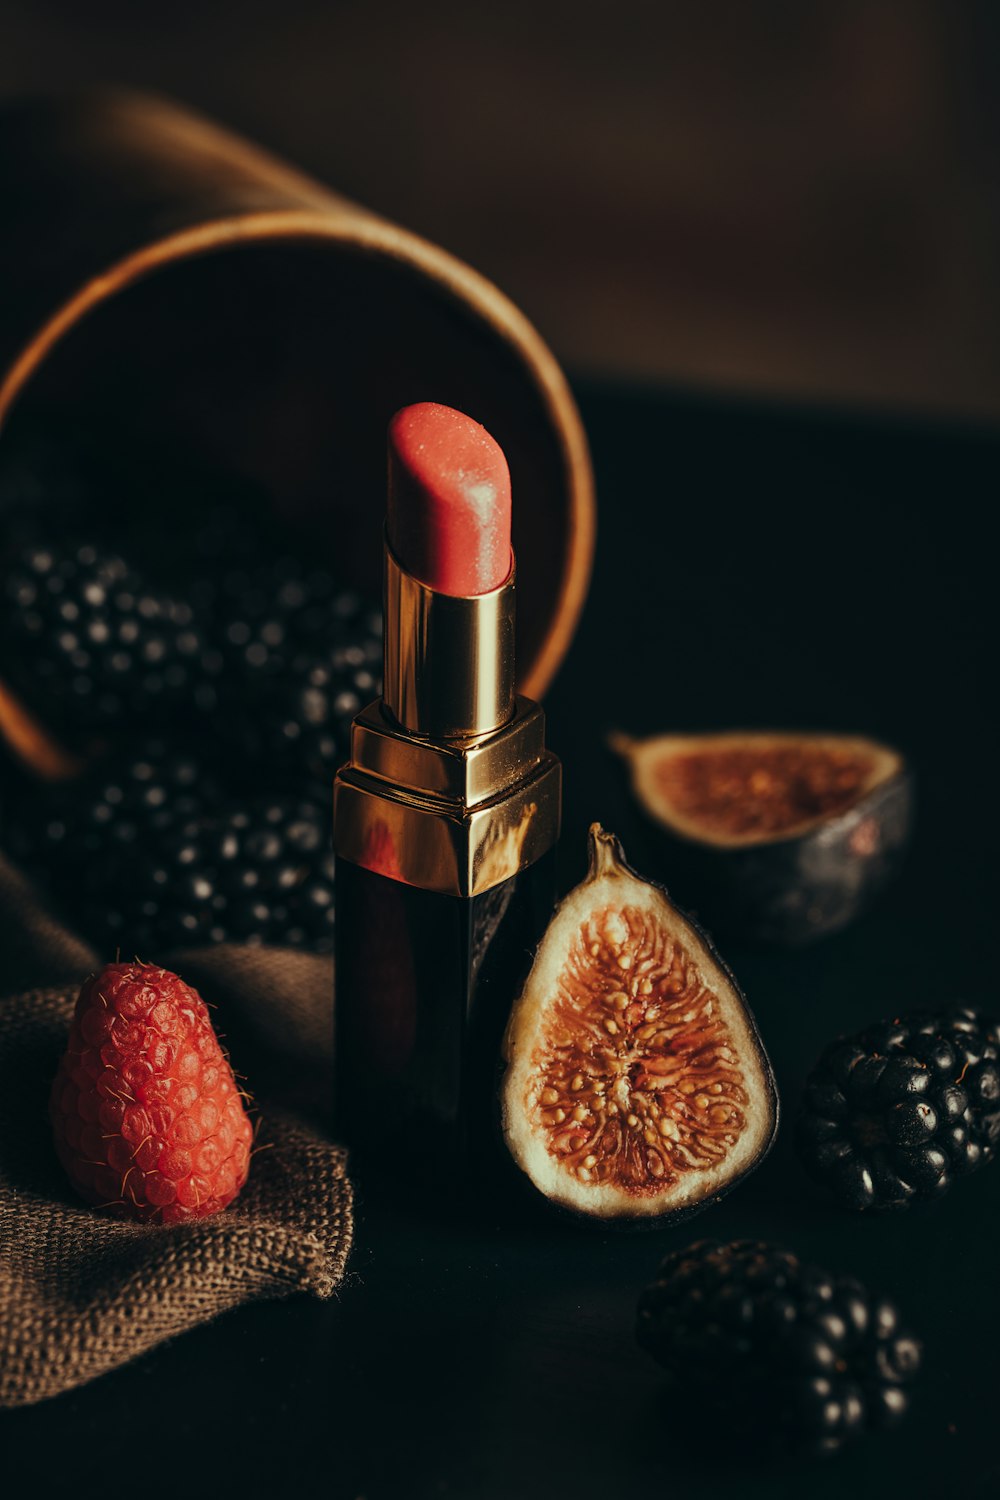 a lipstick and some fruit on a table